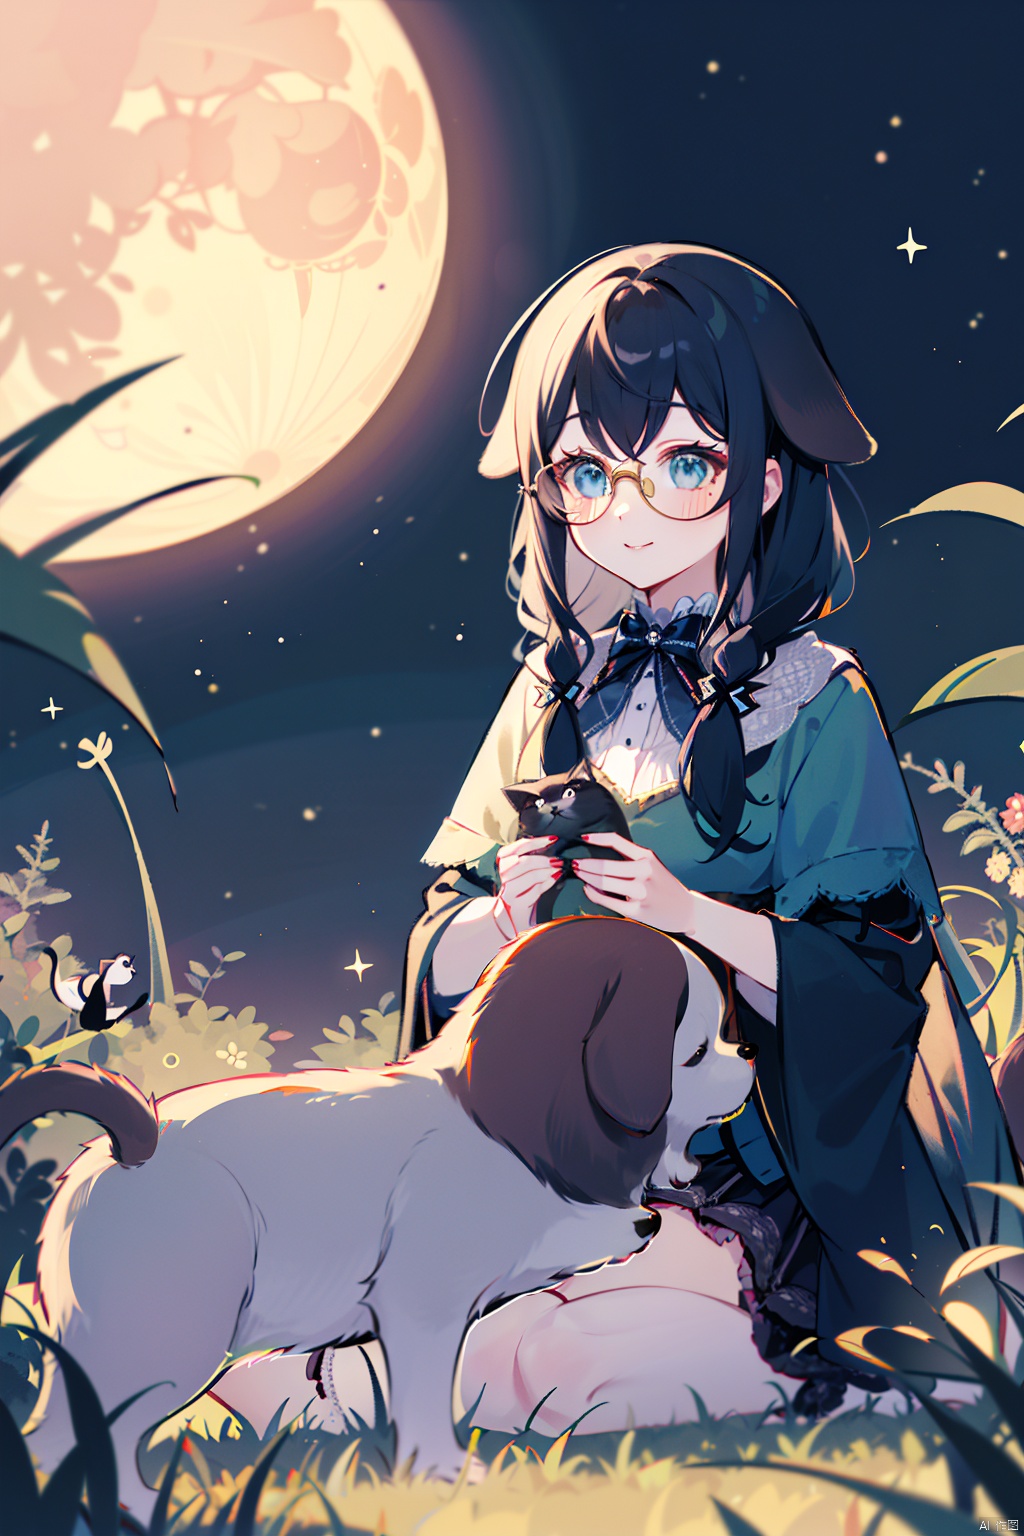 A whimsical scene unfolds under the starry night sky, with a curious cute cat and playful cute dog sitting together at the edge of a lush green lawn. Beside them, a stylish cute girl wearing trendy glasses gazes up at the radiant moon, her face aglow with delight as she takes in the magical atmosphere.